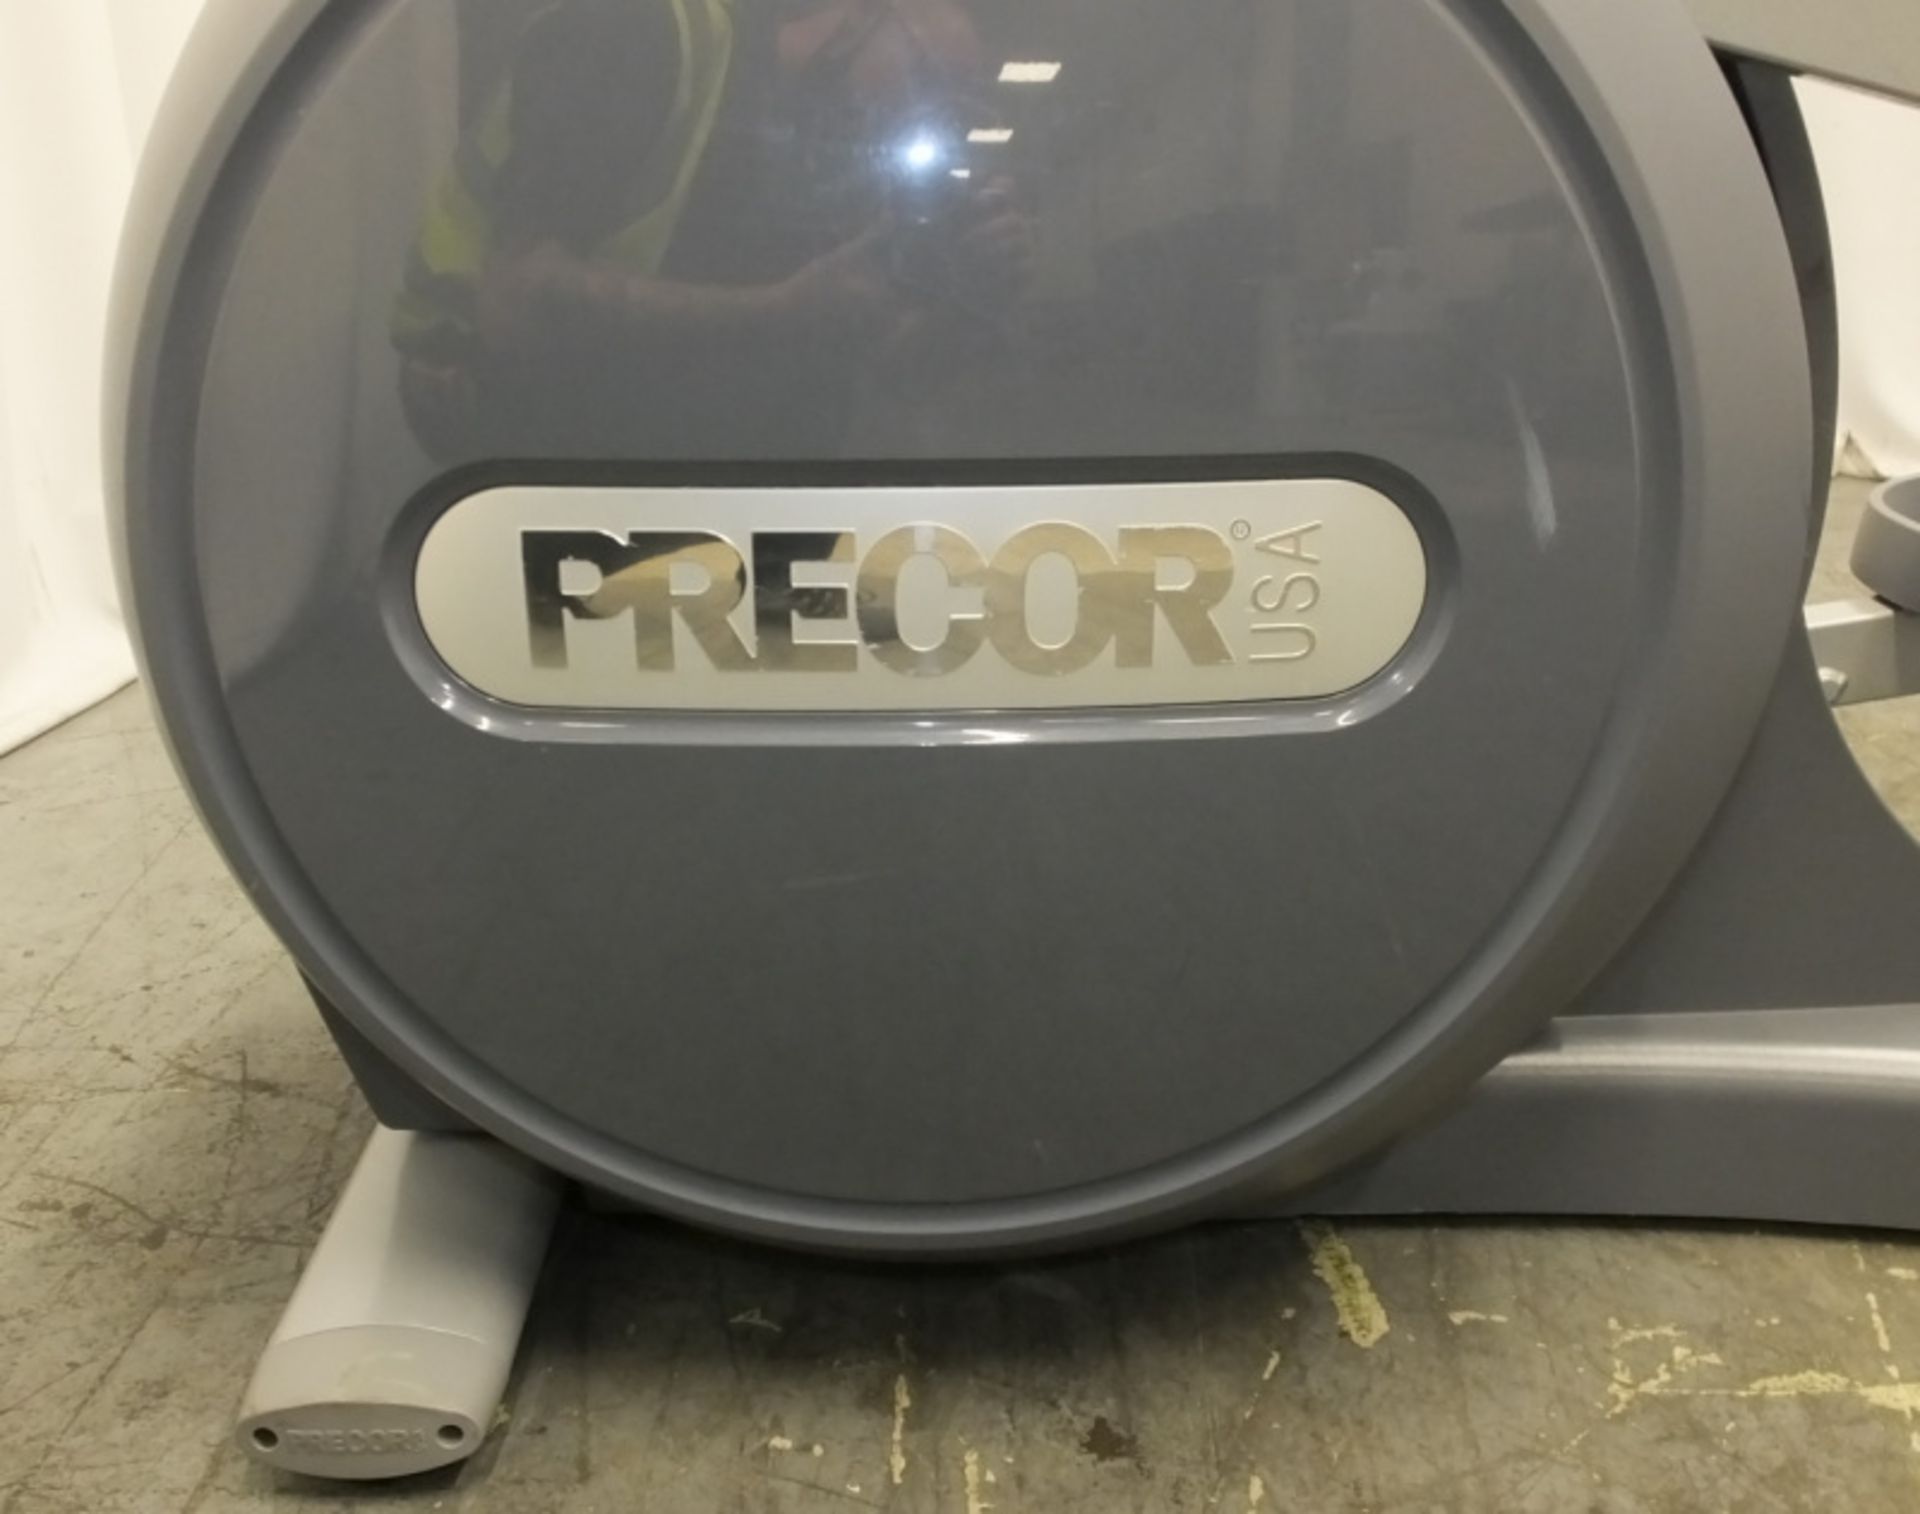 Precor EFX 576i Elliptical Cross Trainer - Please see pictures for condition - Image 12 of 13